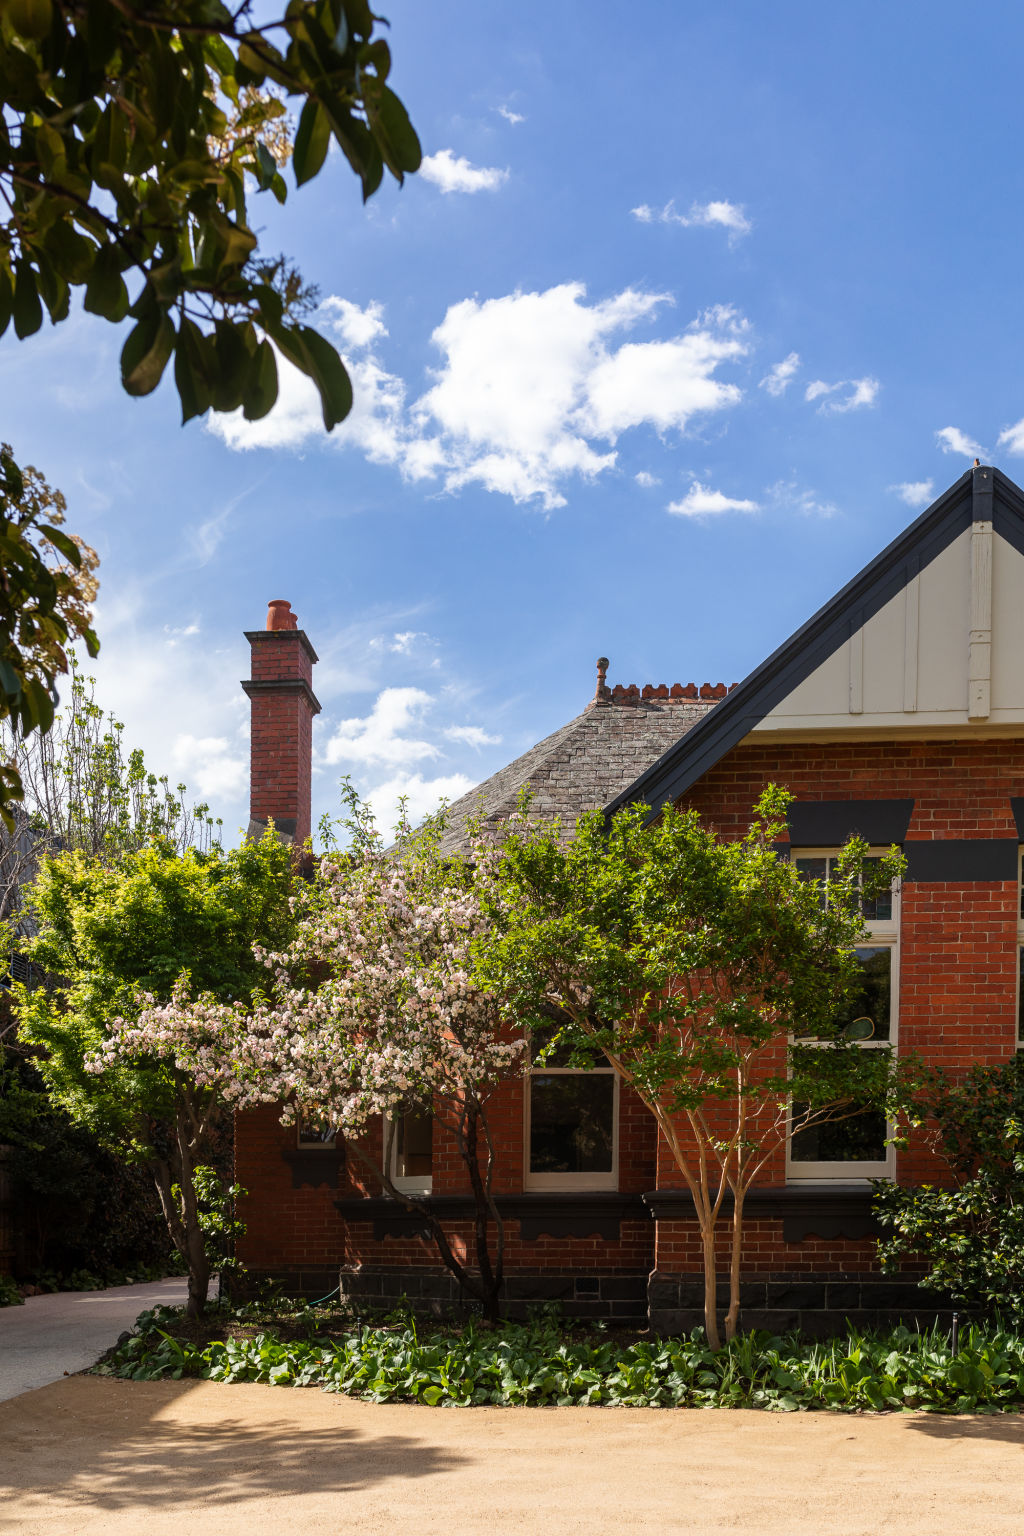 The home is set well back from the street behind a deep front garden. Photo: Greg Briggs